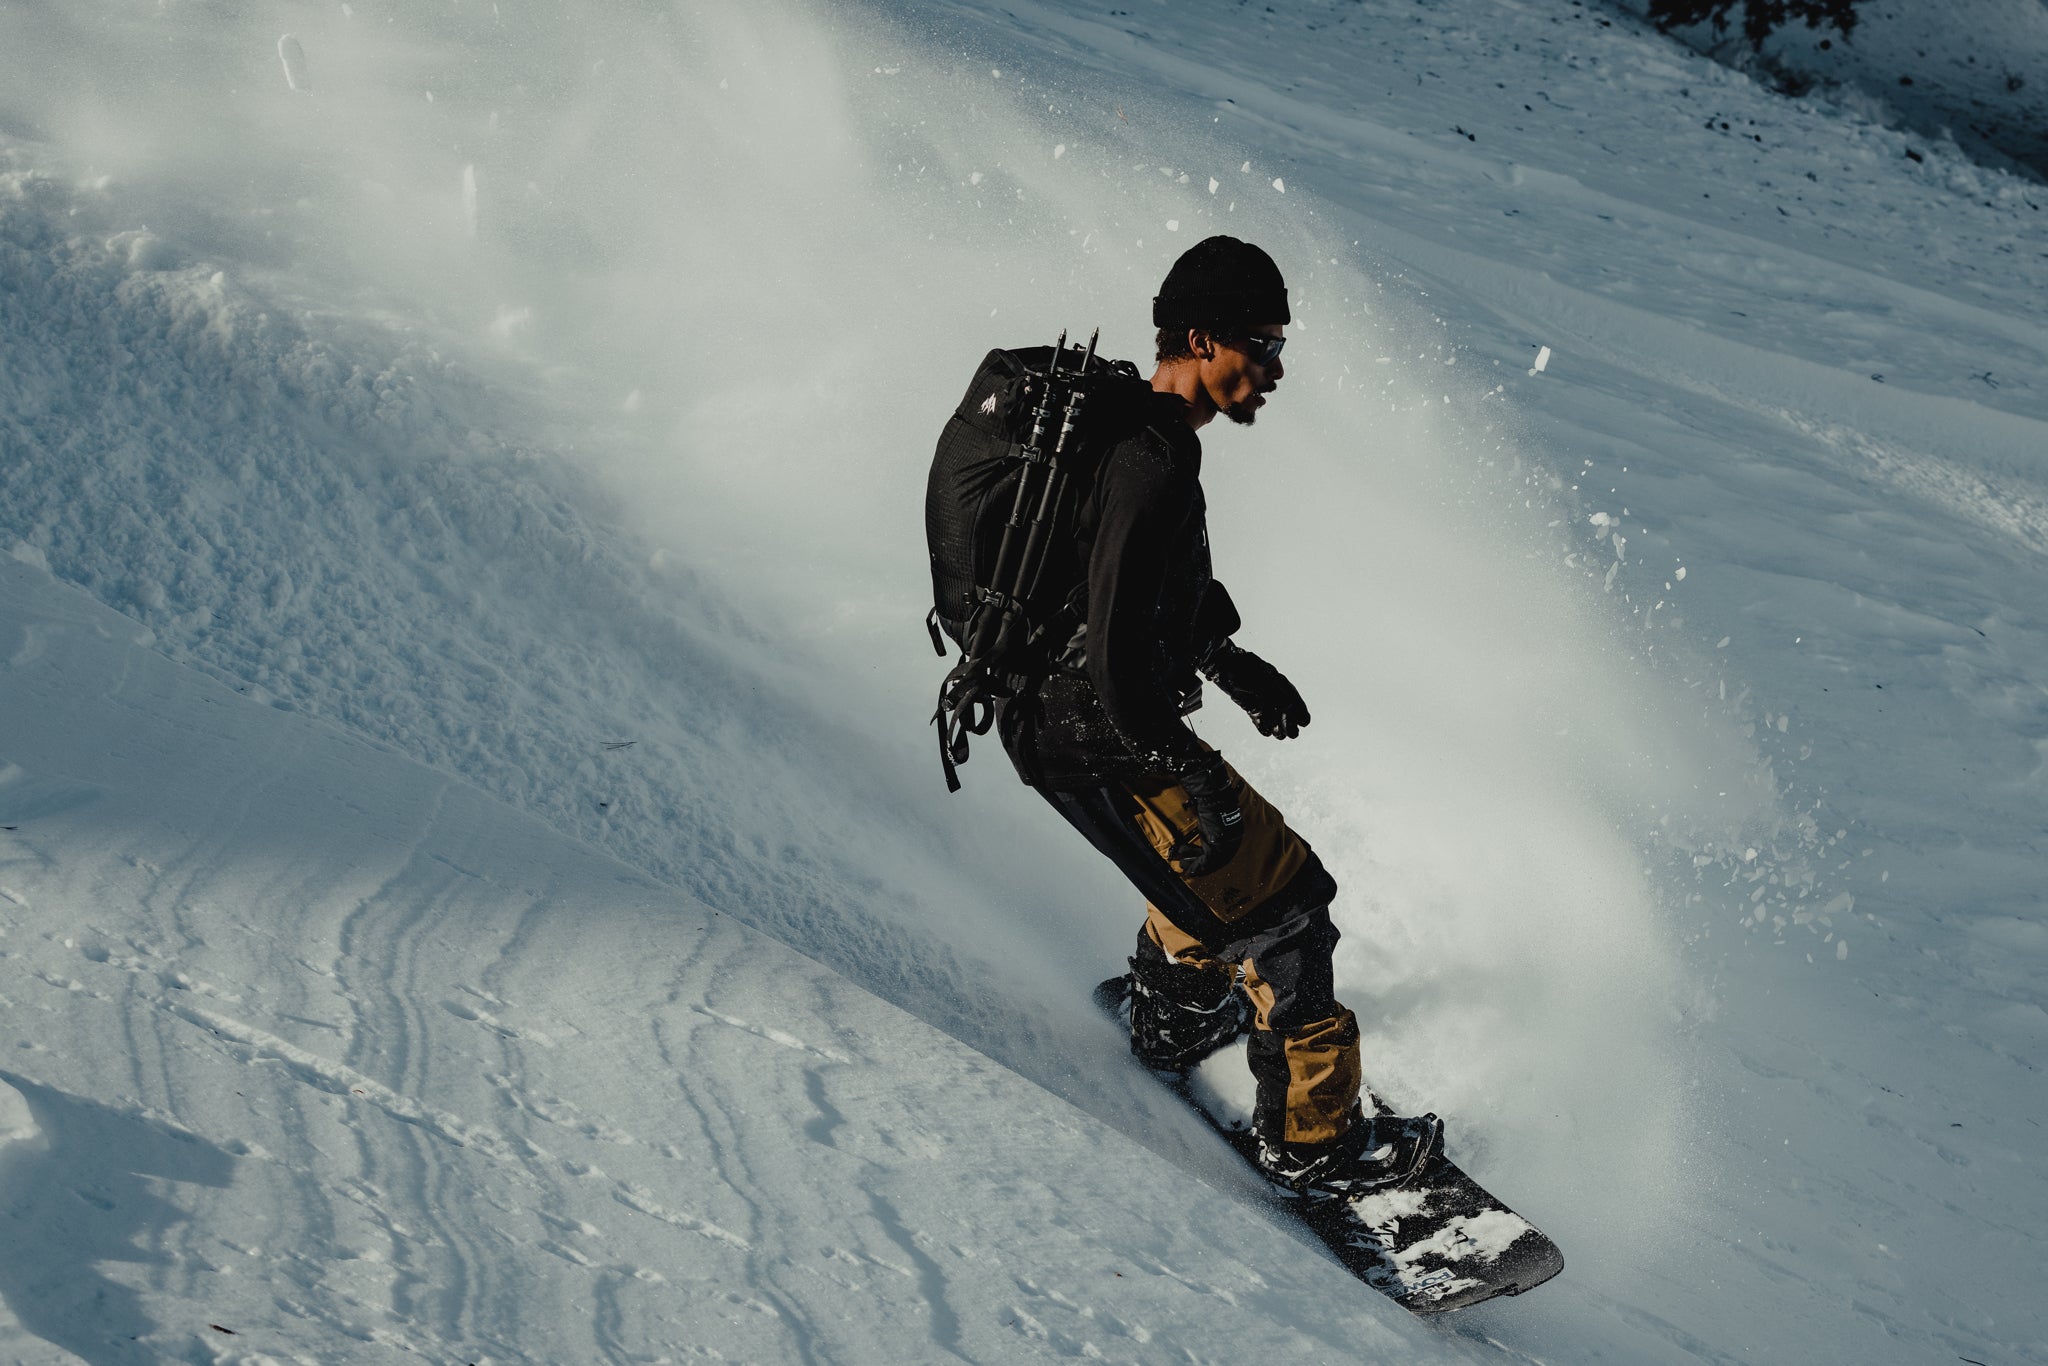 a man snowboards down a backcountry face